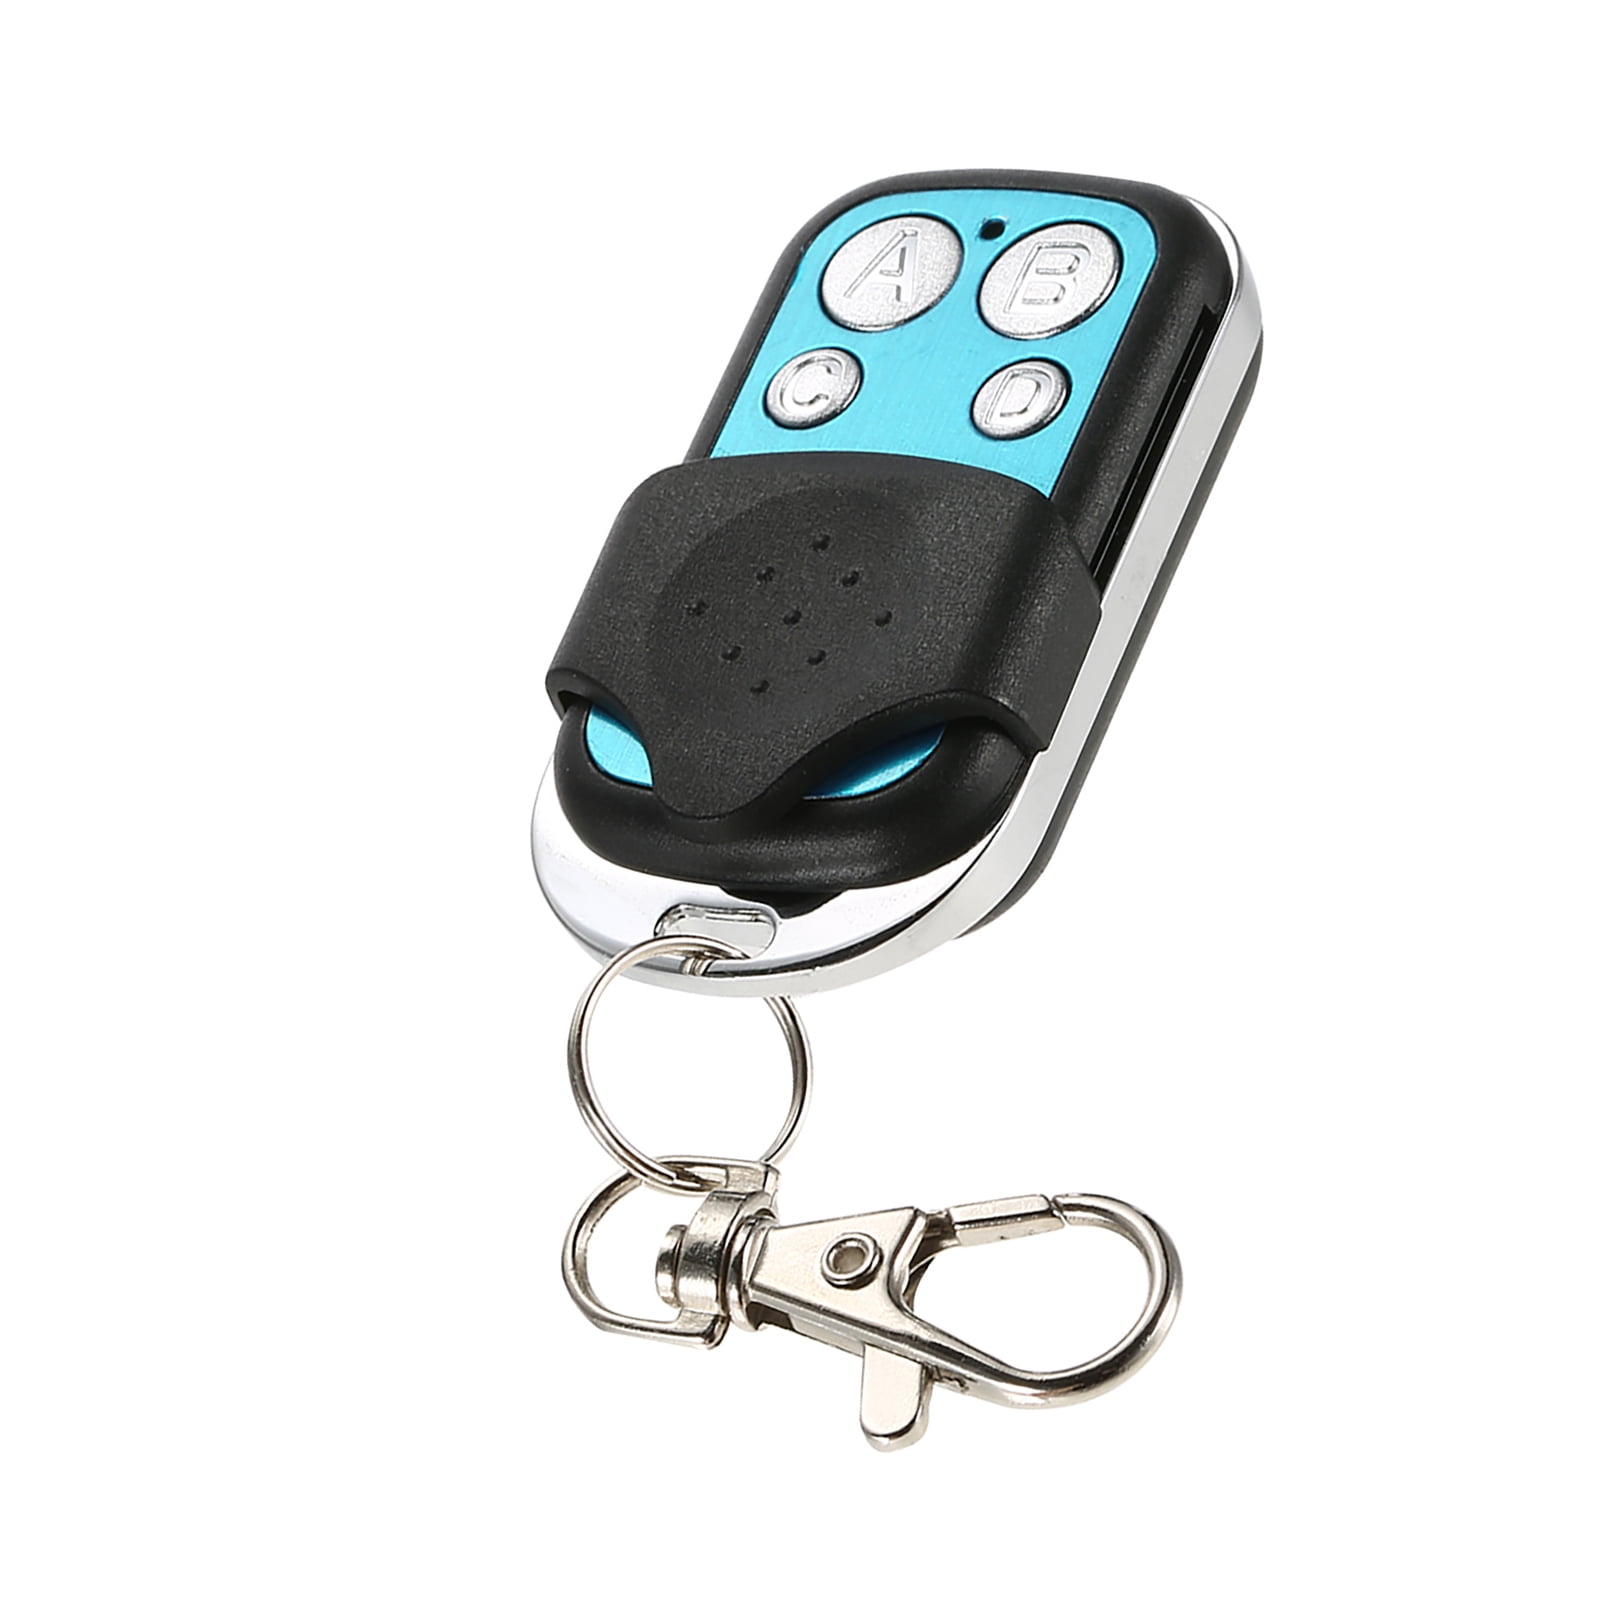 433Mhz Remote Control for Door and Other Intelligent Controller 